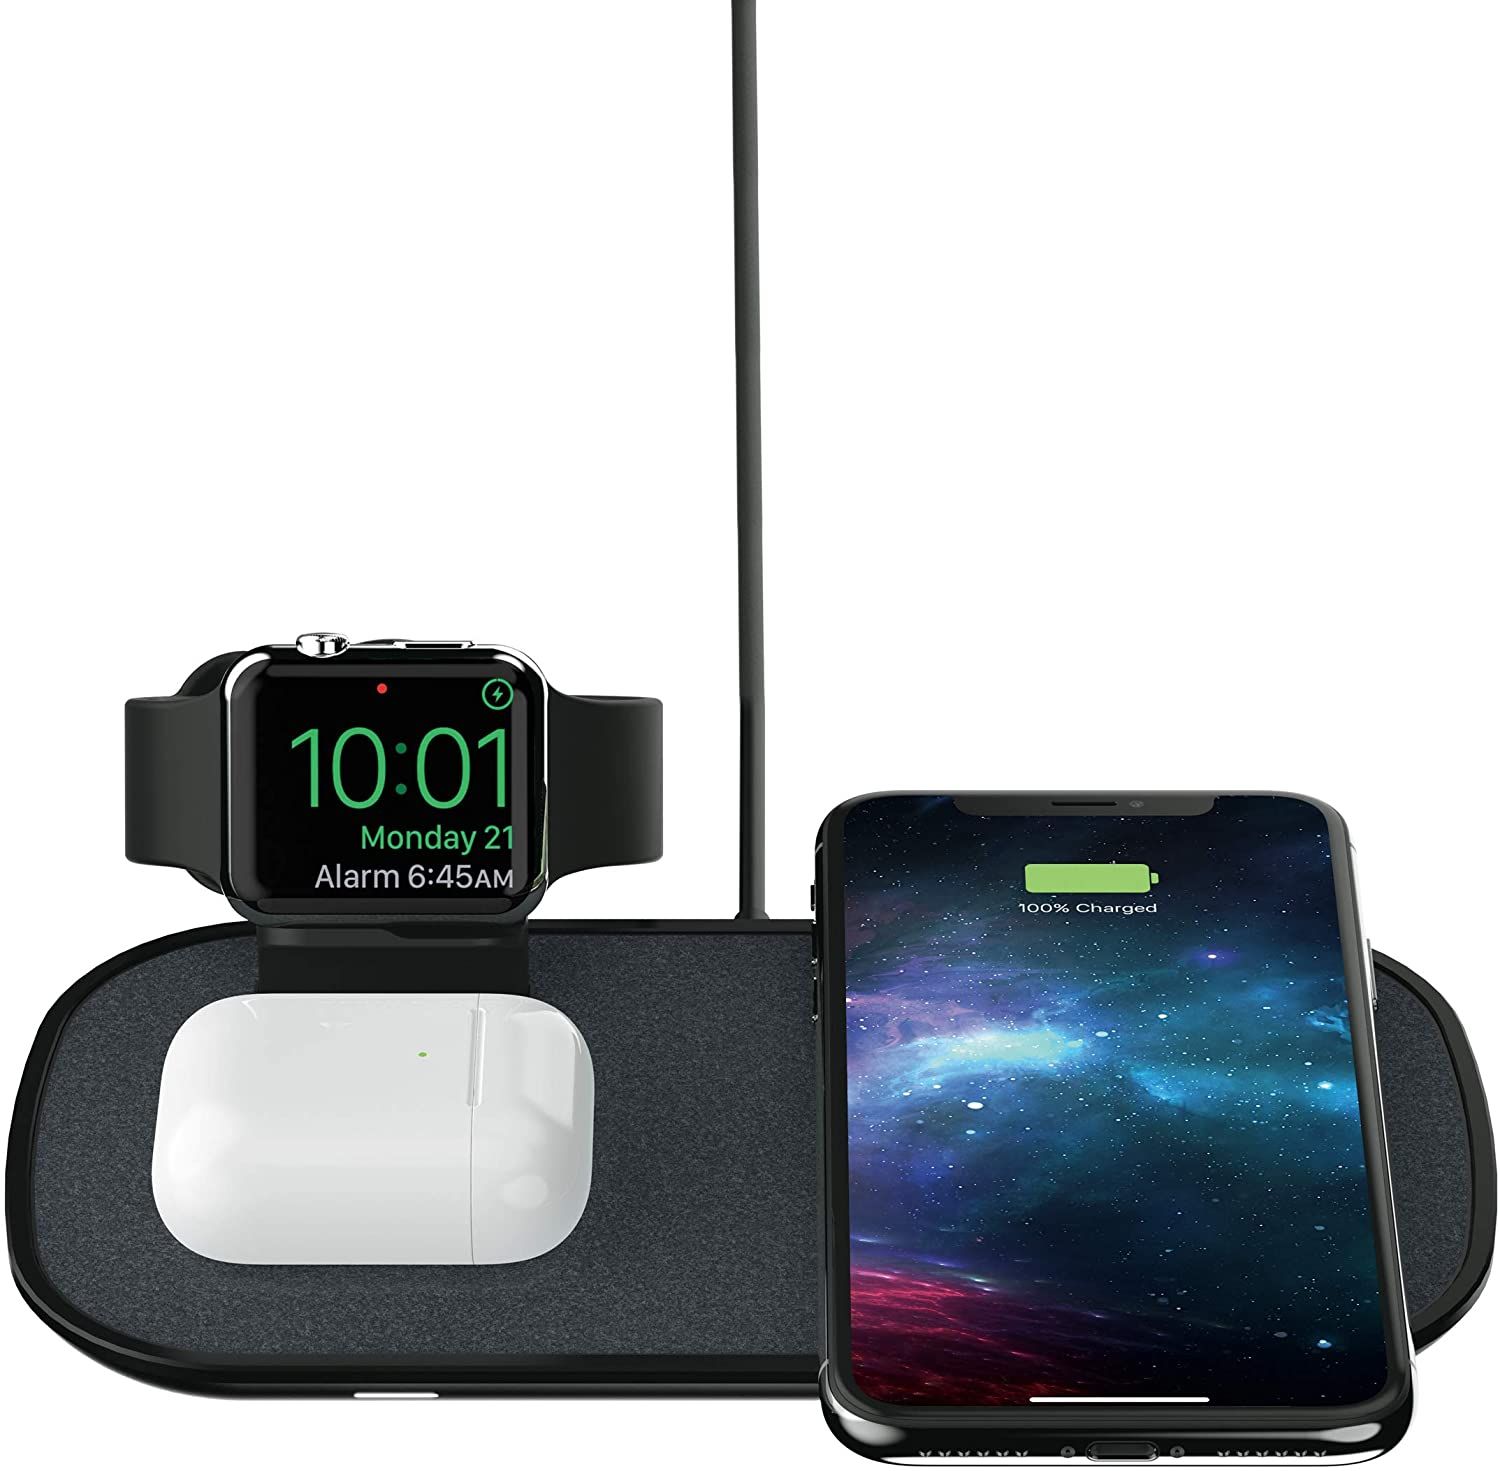 Mophie 3-in-1 Wireless Charging Pad devices